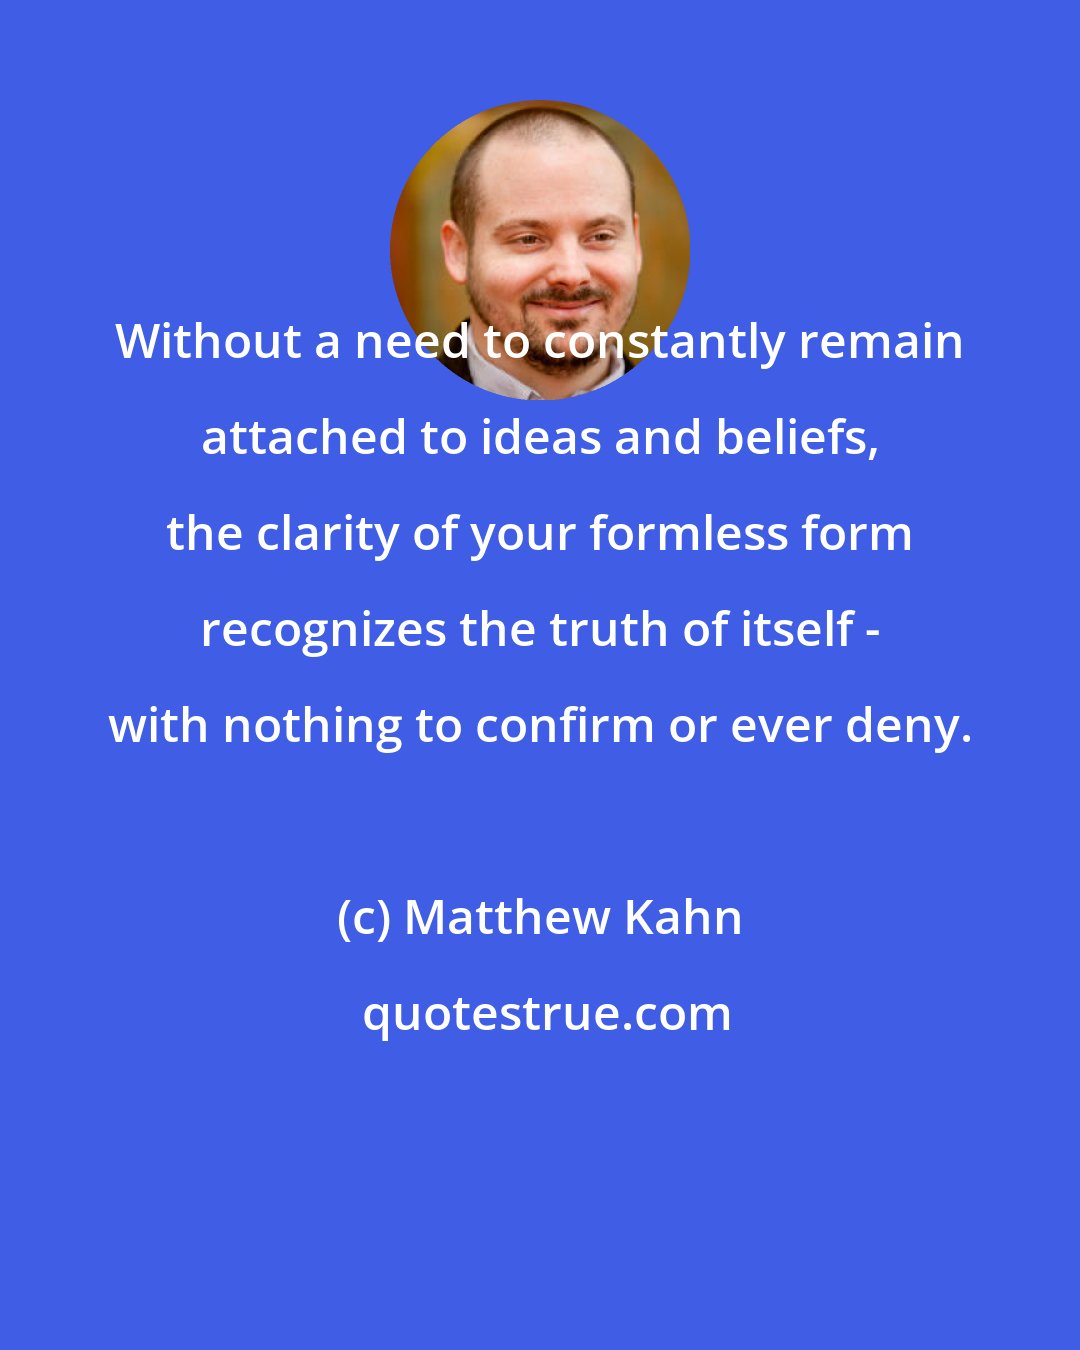 Matthew Kahn: Without a need to constantly remain attached to ideas and beliefs, the clarity of your formless form recognizes the truth of itself - with nothing to confirm or ever deny.